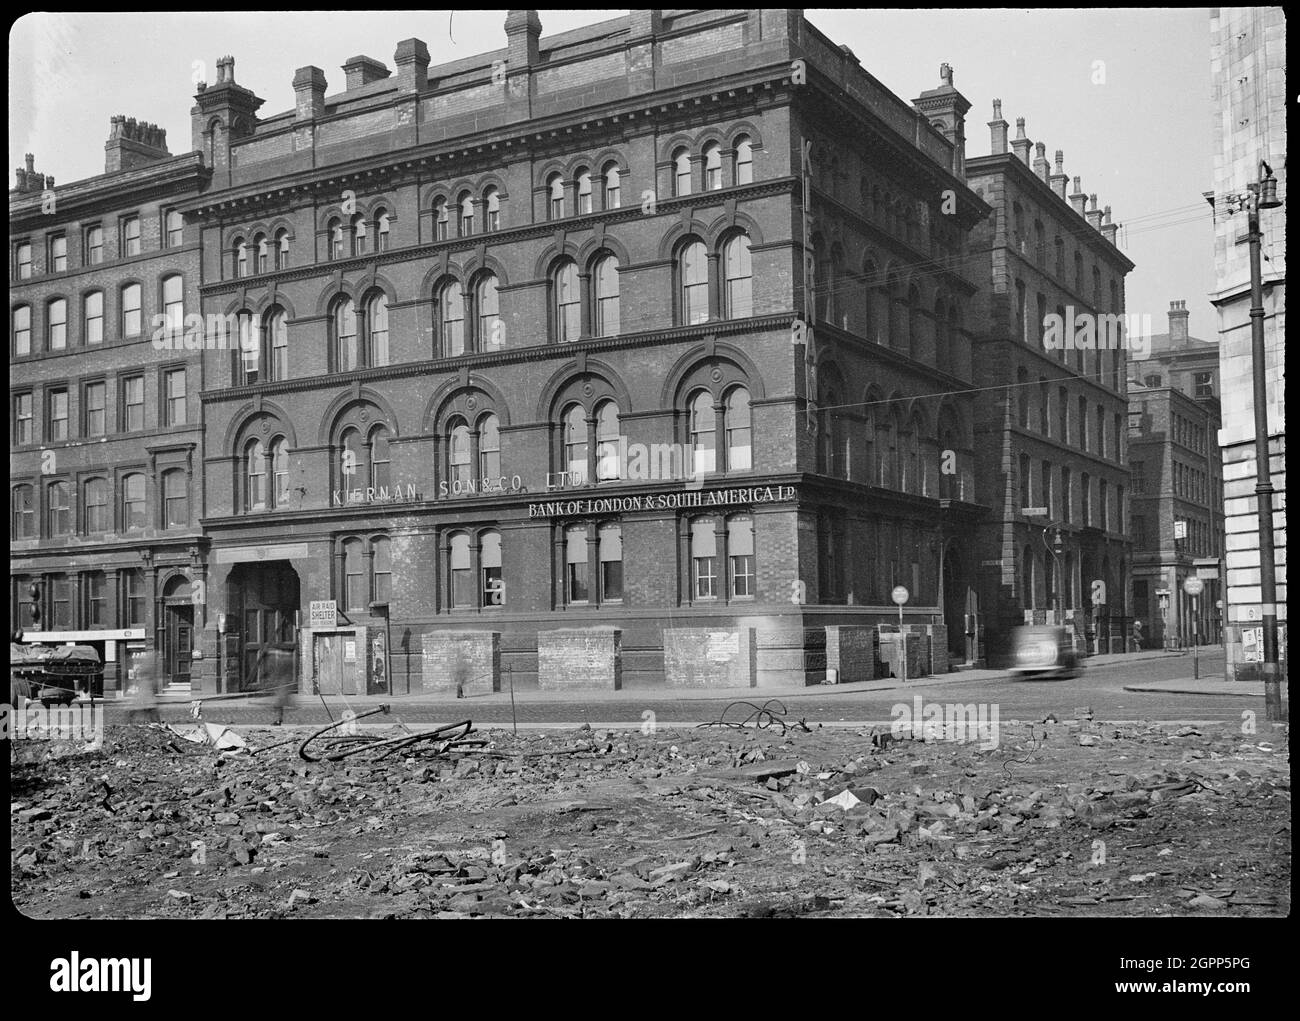 Fraser House, Charlotte Street, Manchester, 1942. An exterior view of Fraser House, a former warehouse on the corner of Charlotte Street and Portland Street, seen from the south with rubble in the foreground. The warehouse was built between c1855 and 1860 by Edward Walters with red brick and sandstone dressings, and it was used as a textile manufacturer's warehouse. It has four storeys and a basement, with five bays to the south, and three bays to the east. There is a sign on the south facade, reading: &quot;AIR RAID SHELTER/ 200 PERSONS&quot;, and in the foreground is rubble most likely bomb Stock Photo